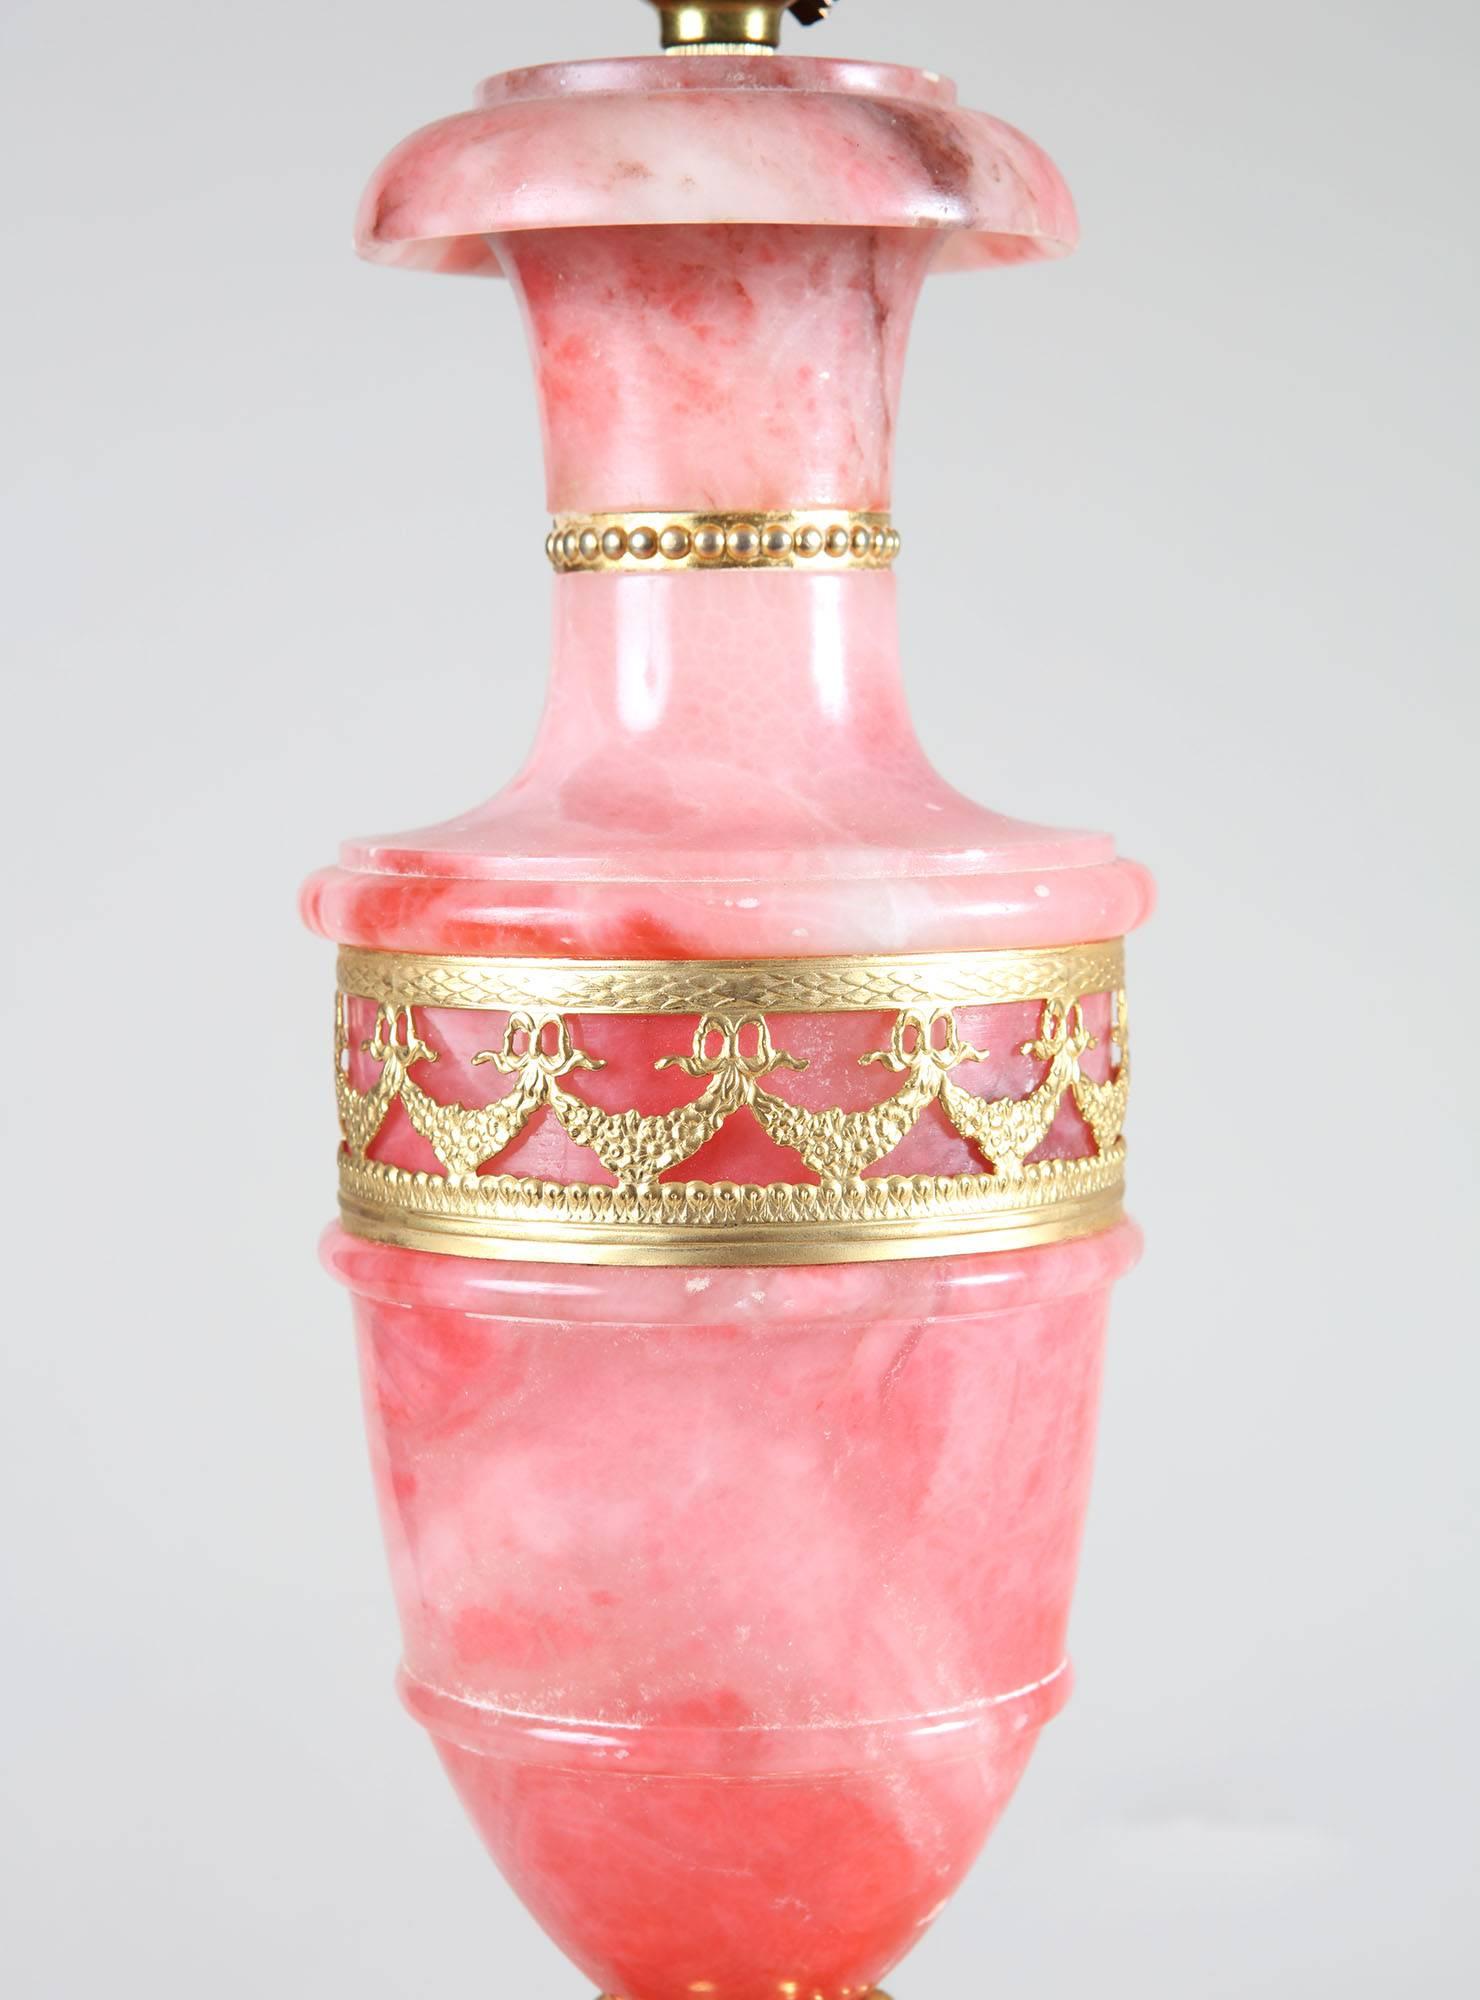 A pair of ormolu-mounted pink onyx lamps with red tasseled shades

Measure: 42 cm high (to the top of the column), 
77 cm high (including shade).